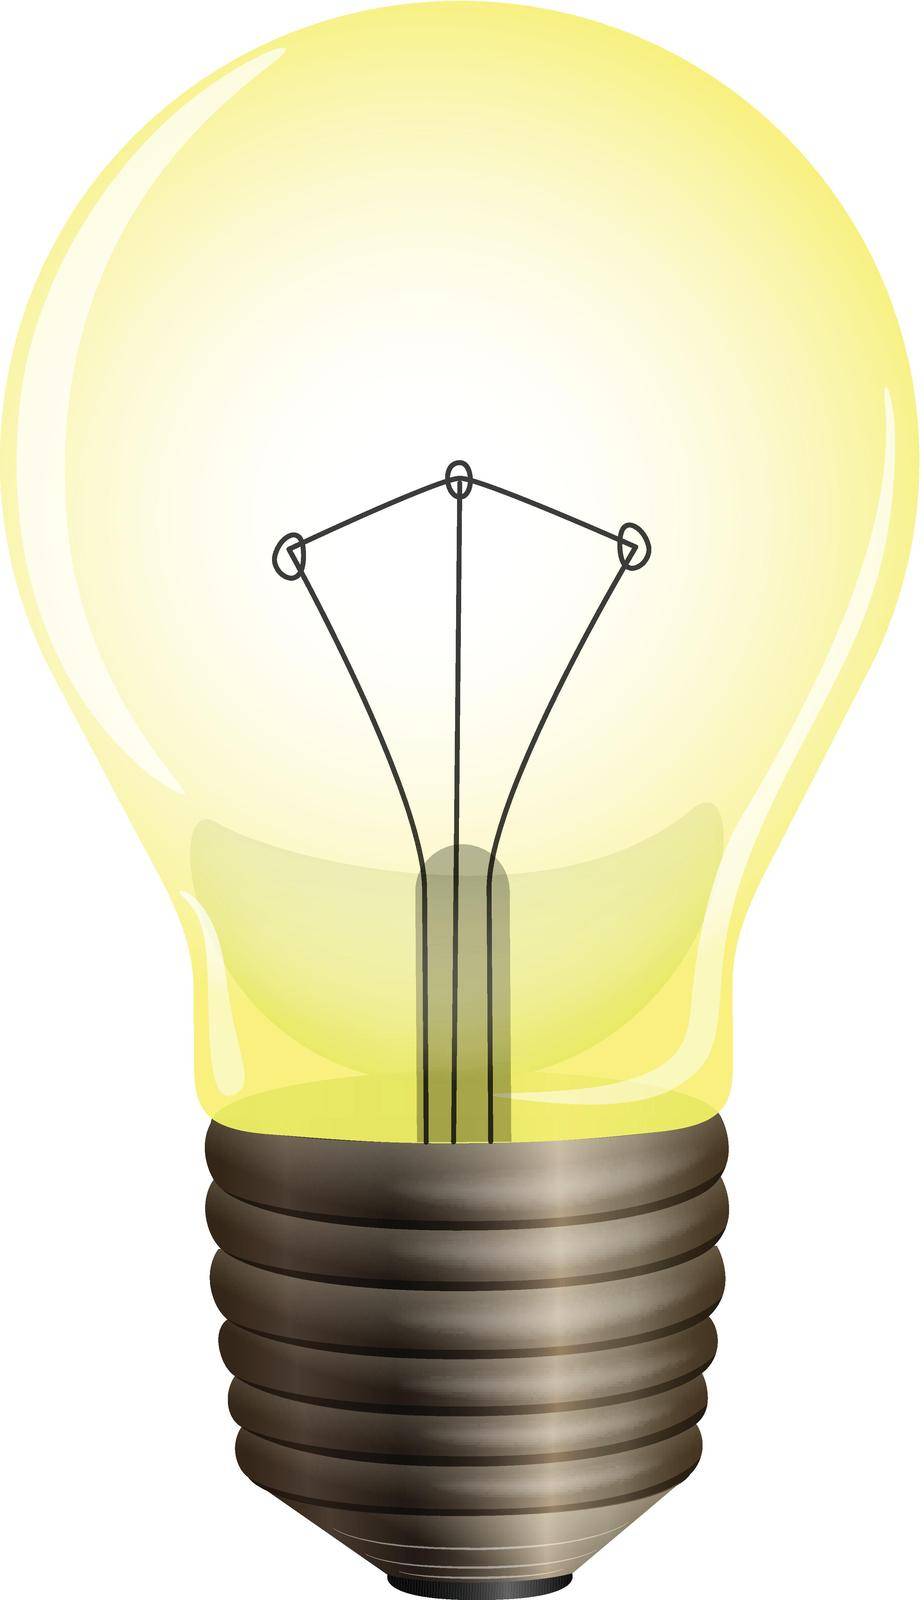 Illustration of a yellow bulb on a white background